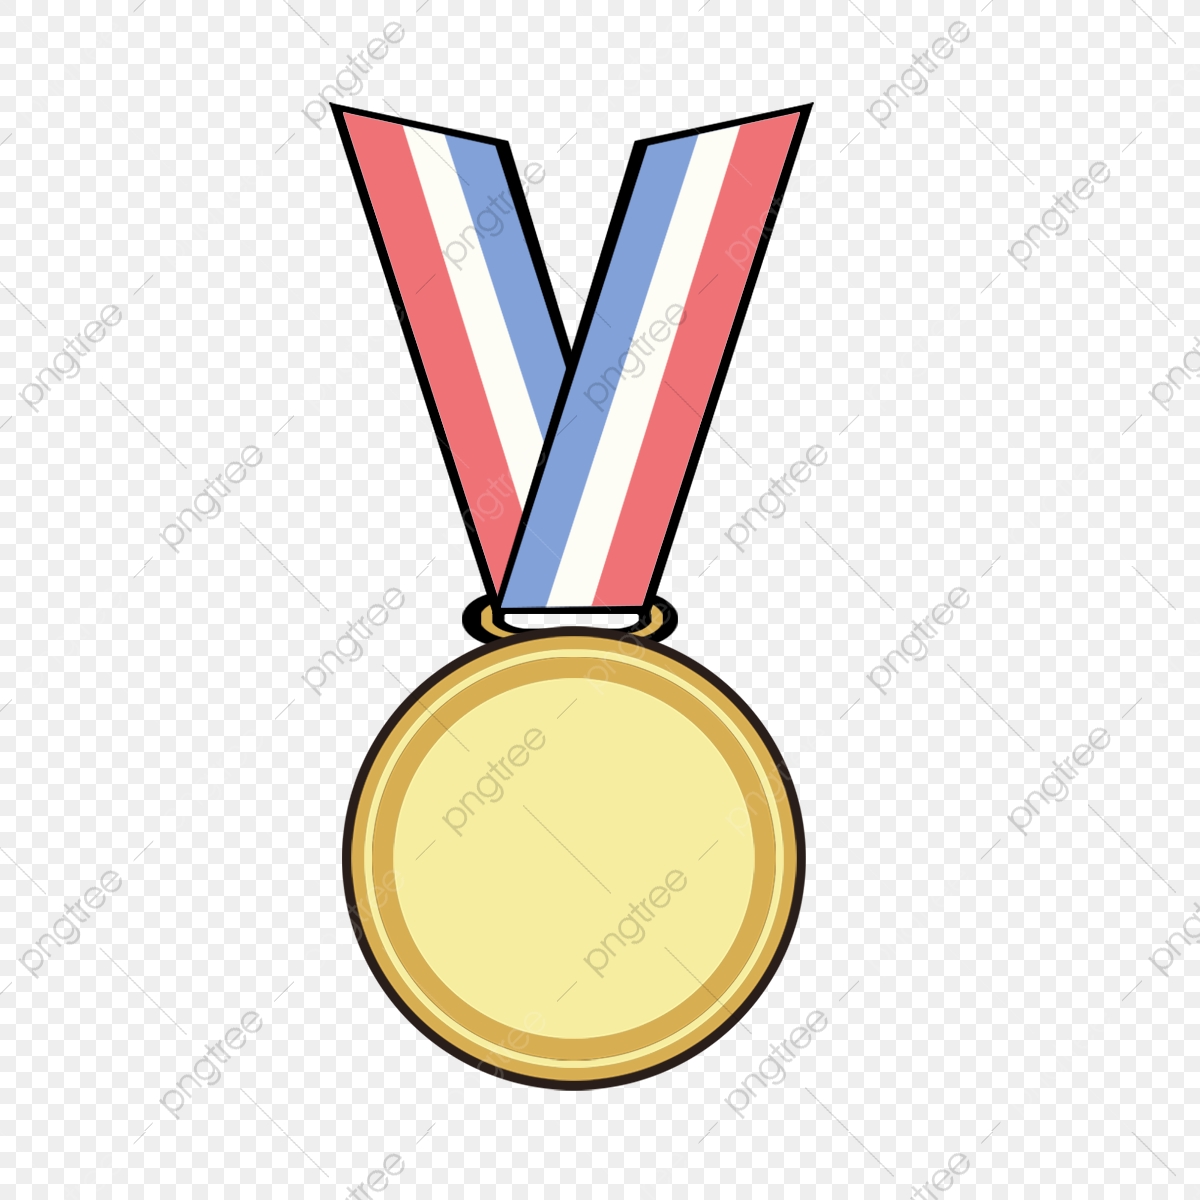 prize clipart badge honor